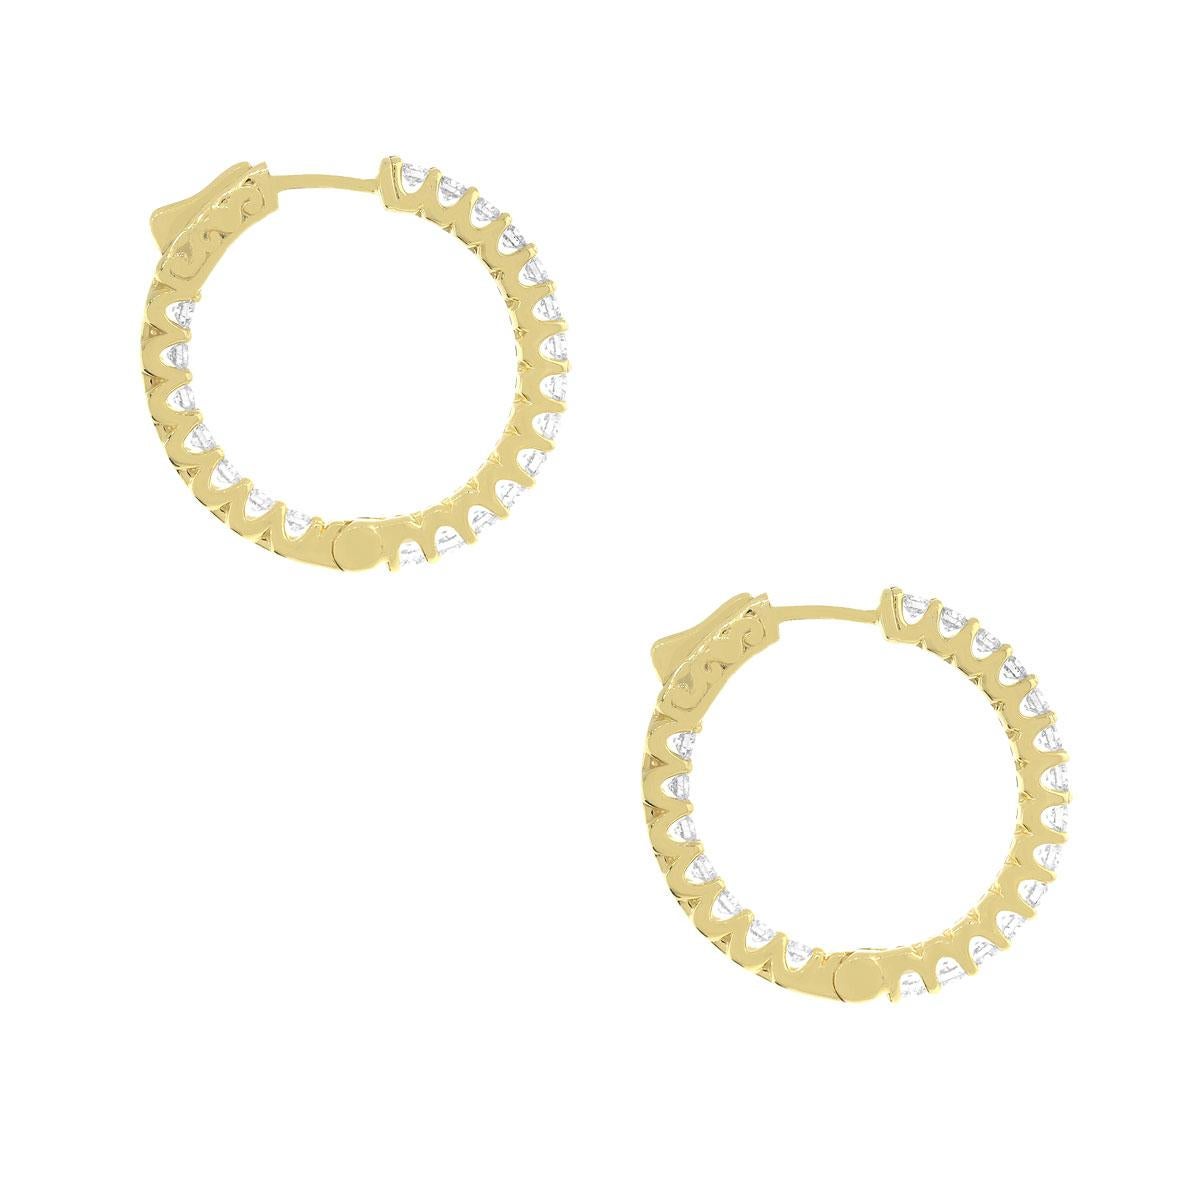 Material: 14k Yellow gold
Style: Diamond inside out hoop earrings
Diamond Details: 36 Stones, approximately 5.27ctw of round brilliant diamonds. Diamonds are G/H in color and VS in clarity.
Earring Measurements: 1.25″ x 0.20″ x 1.30
Total Weight: